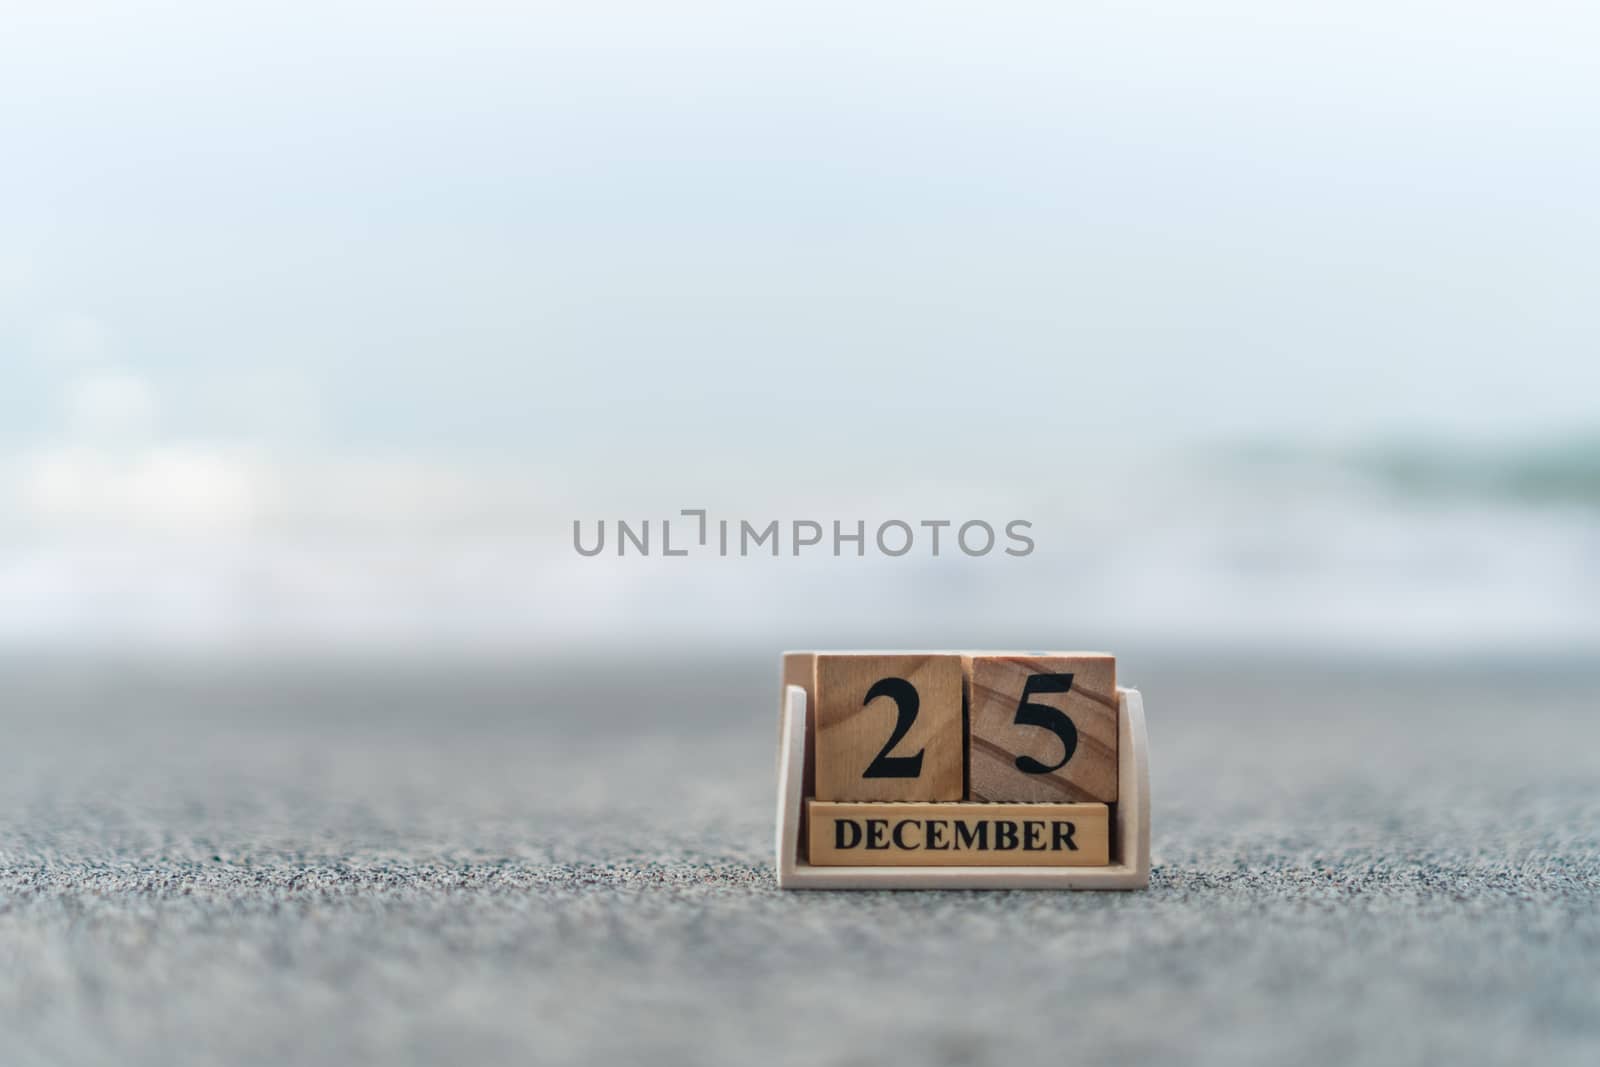 Wood brick block show date and month calendar of 25th December or Chritstmas day. by Suwant